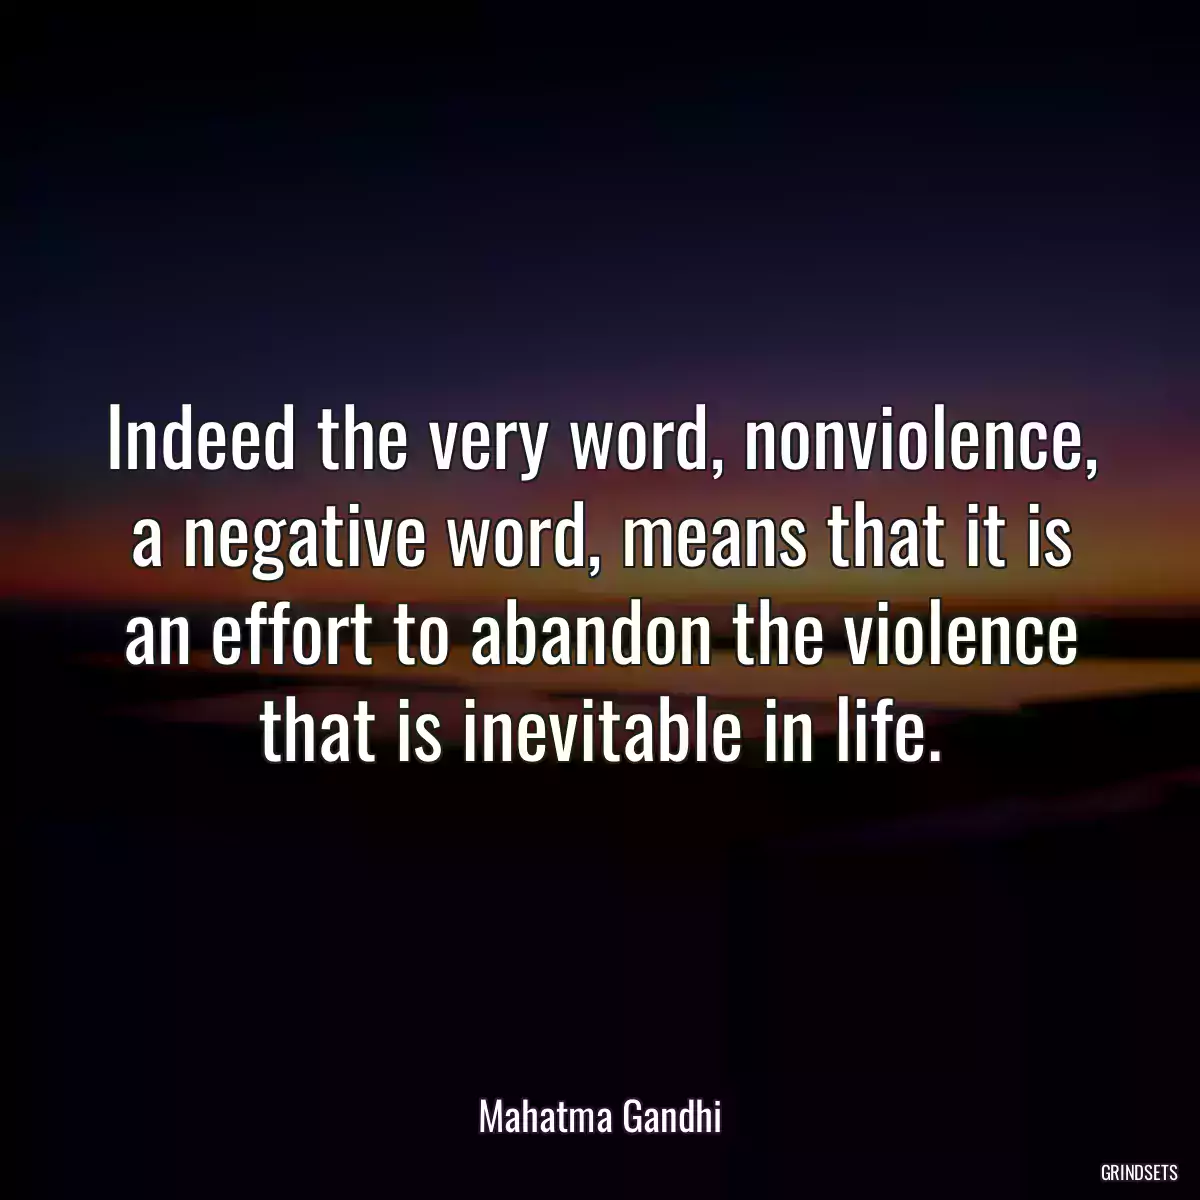 Indeed the very word, nonviolence, a negative word, means that it is an effort to abandon the violence that is inevitable in life.